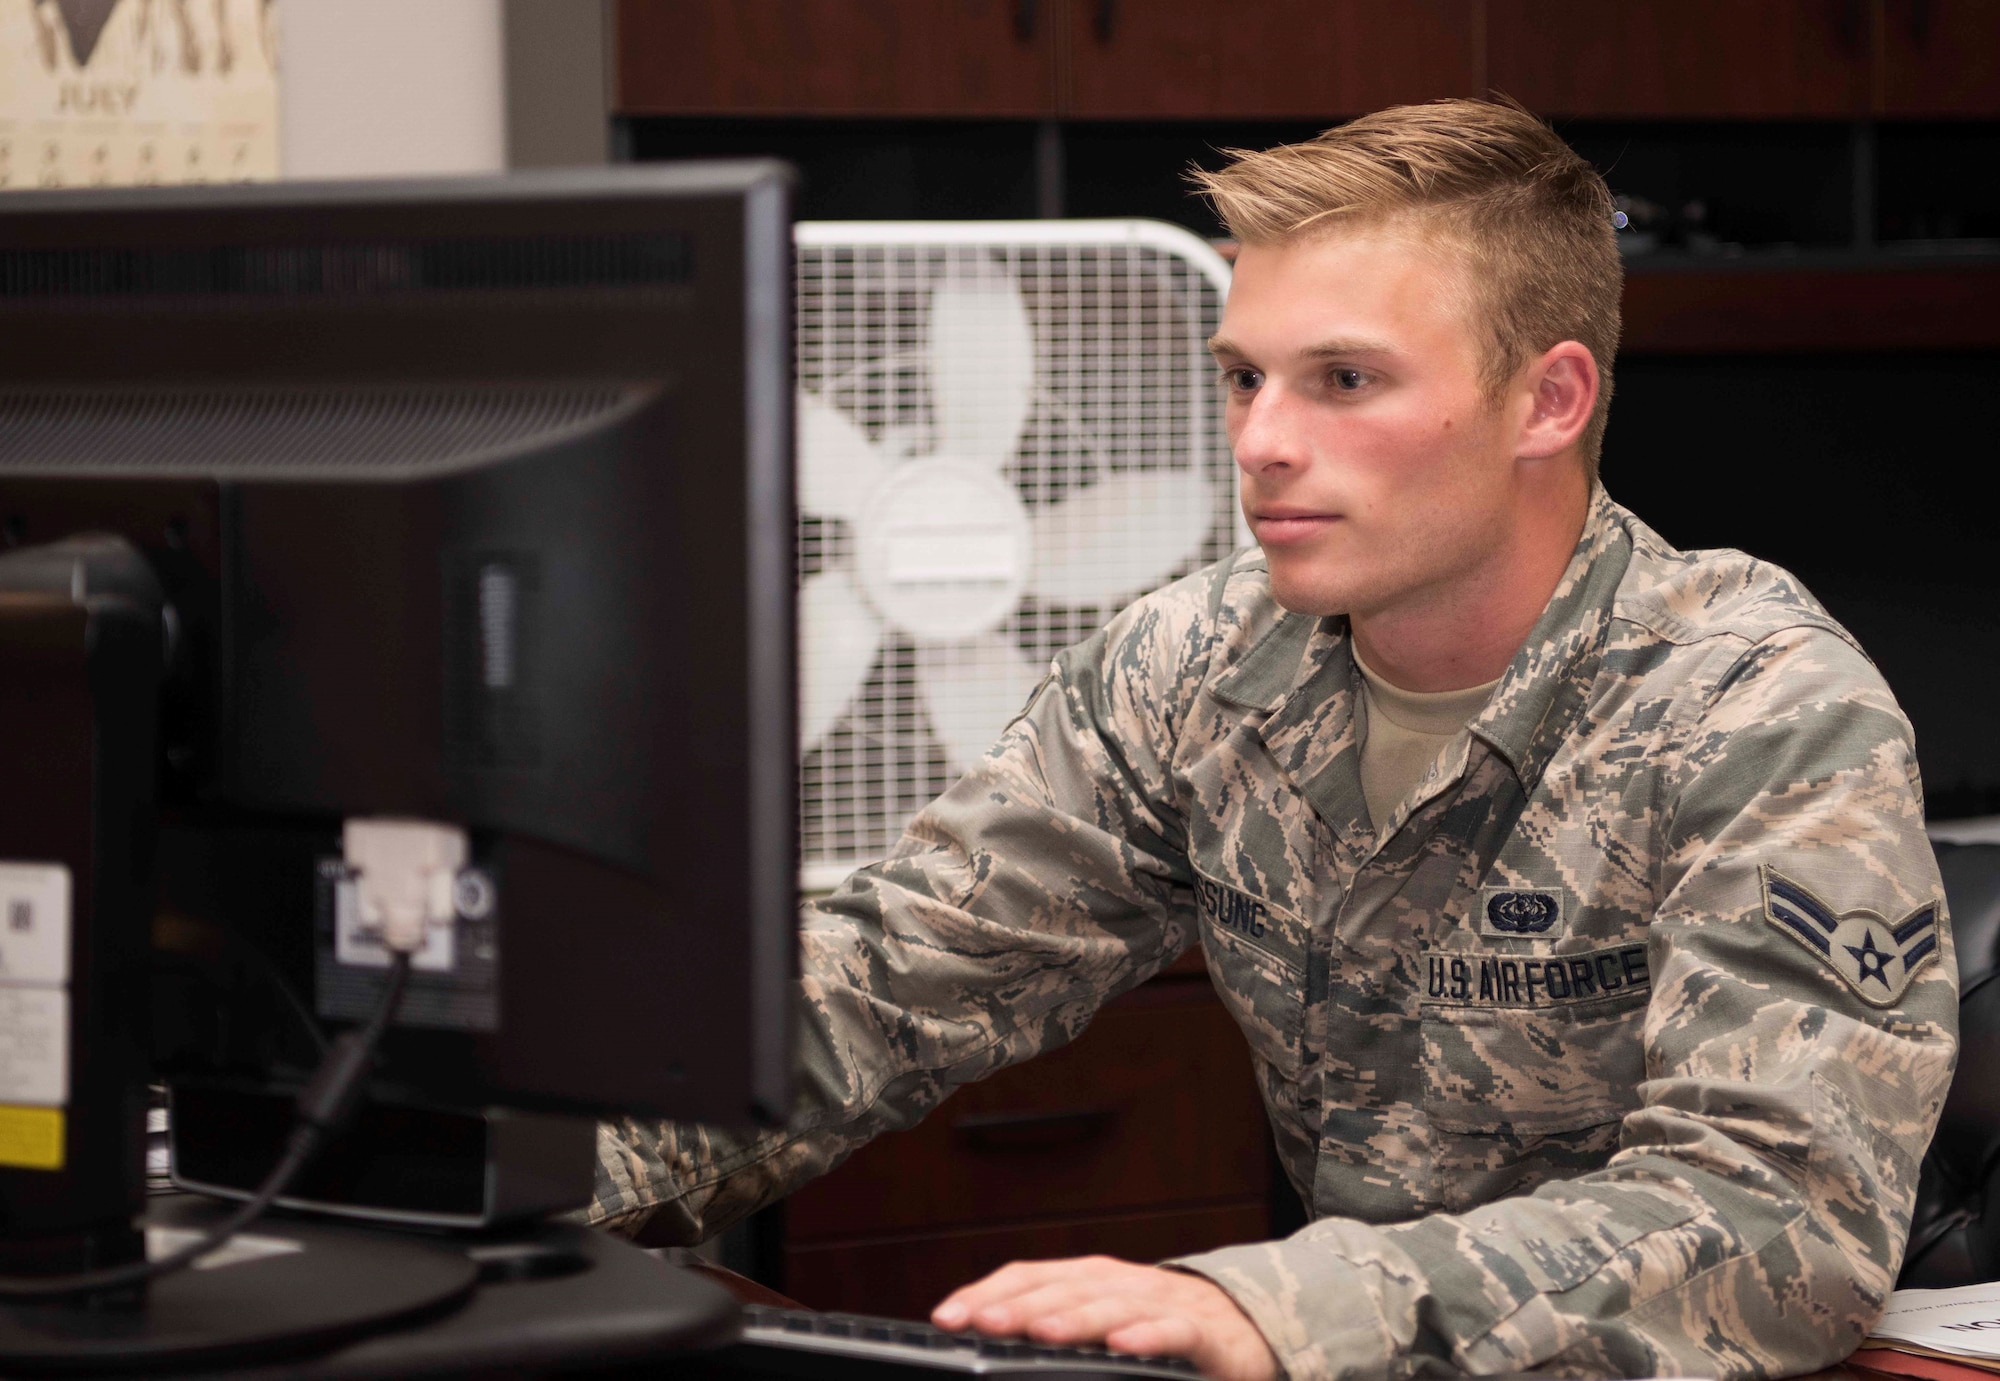 Airman 1st Class Ryan Hussung, 30th Space Communication Squadron Airman, works on a computer July 18, 2018, on Vandenberg Air Force Base, Calif. Hussung works for the knowledge management center in the squadron.